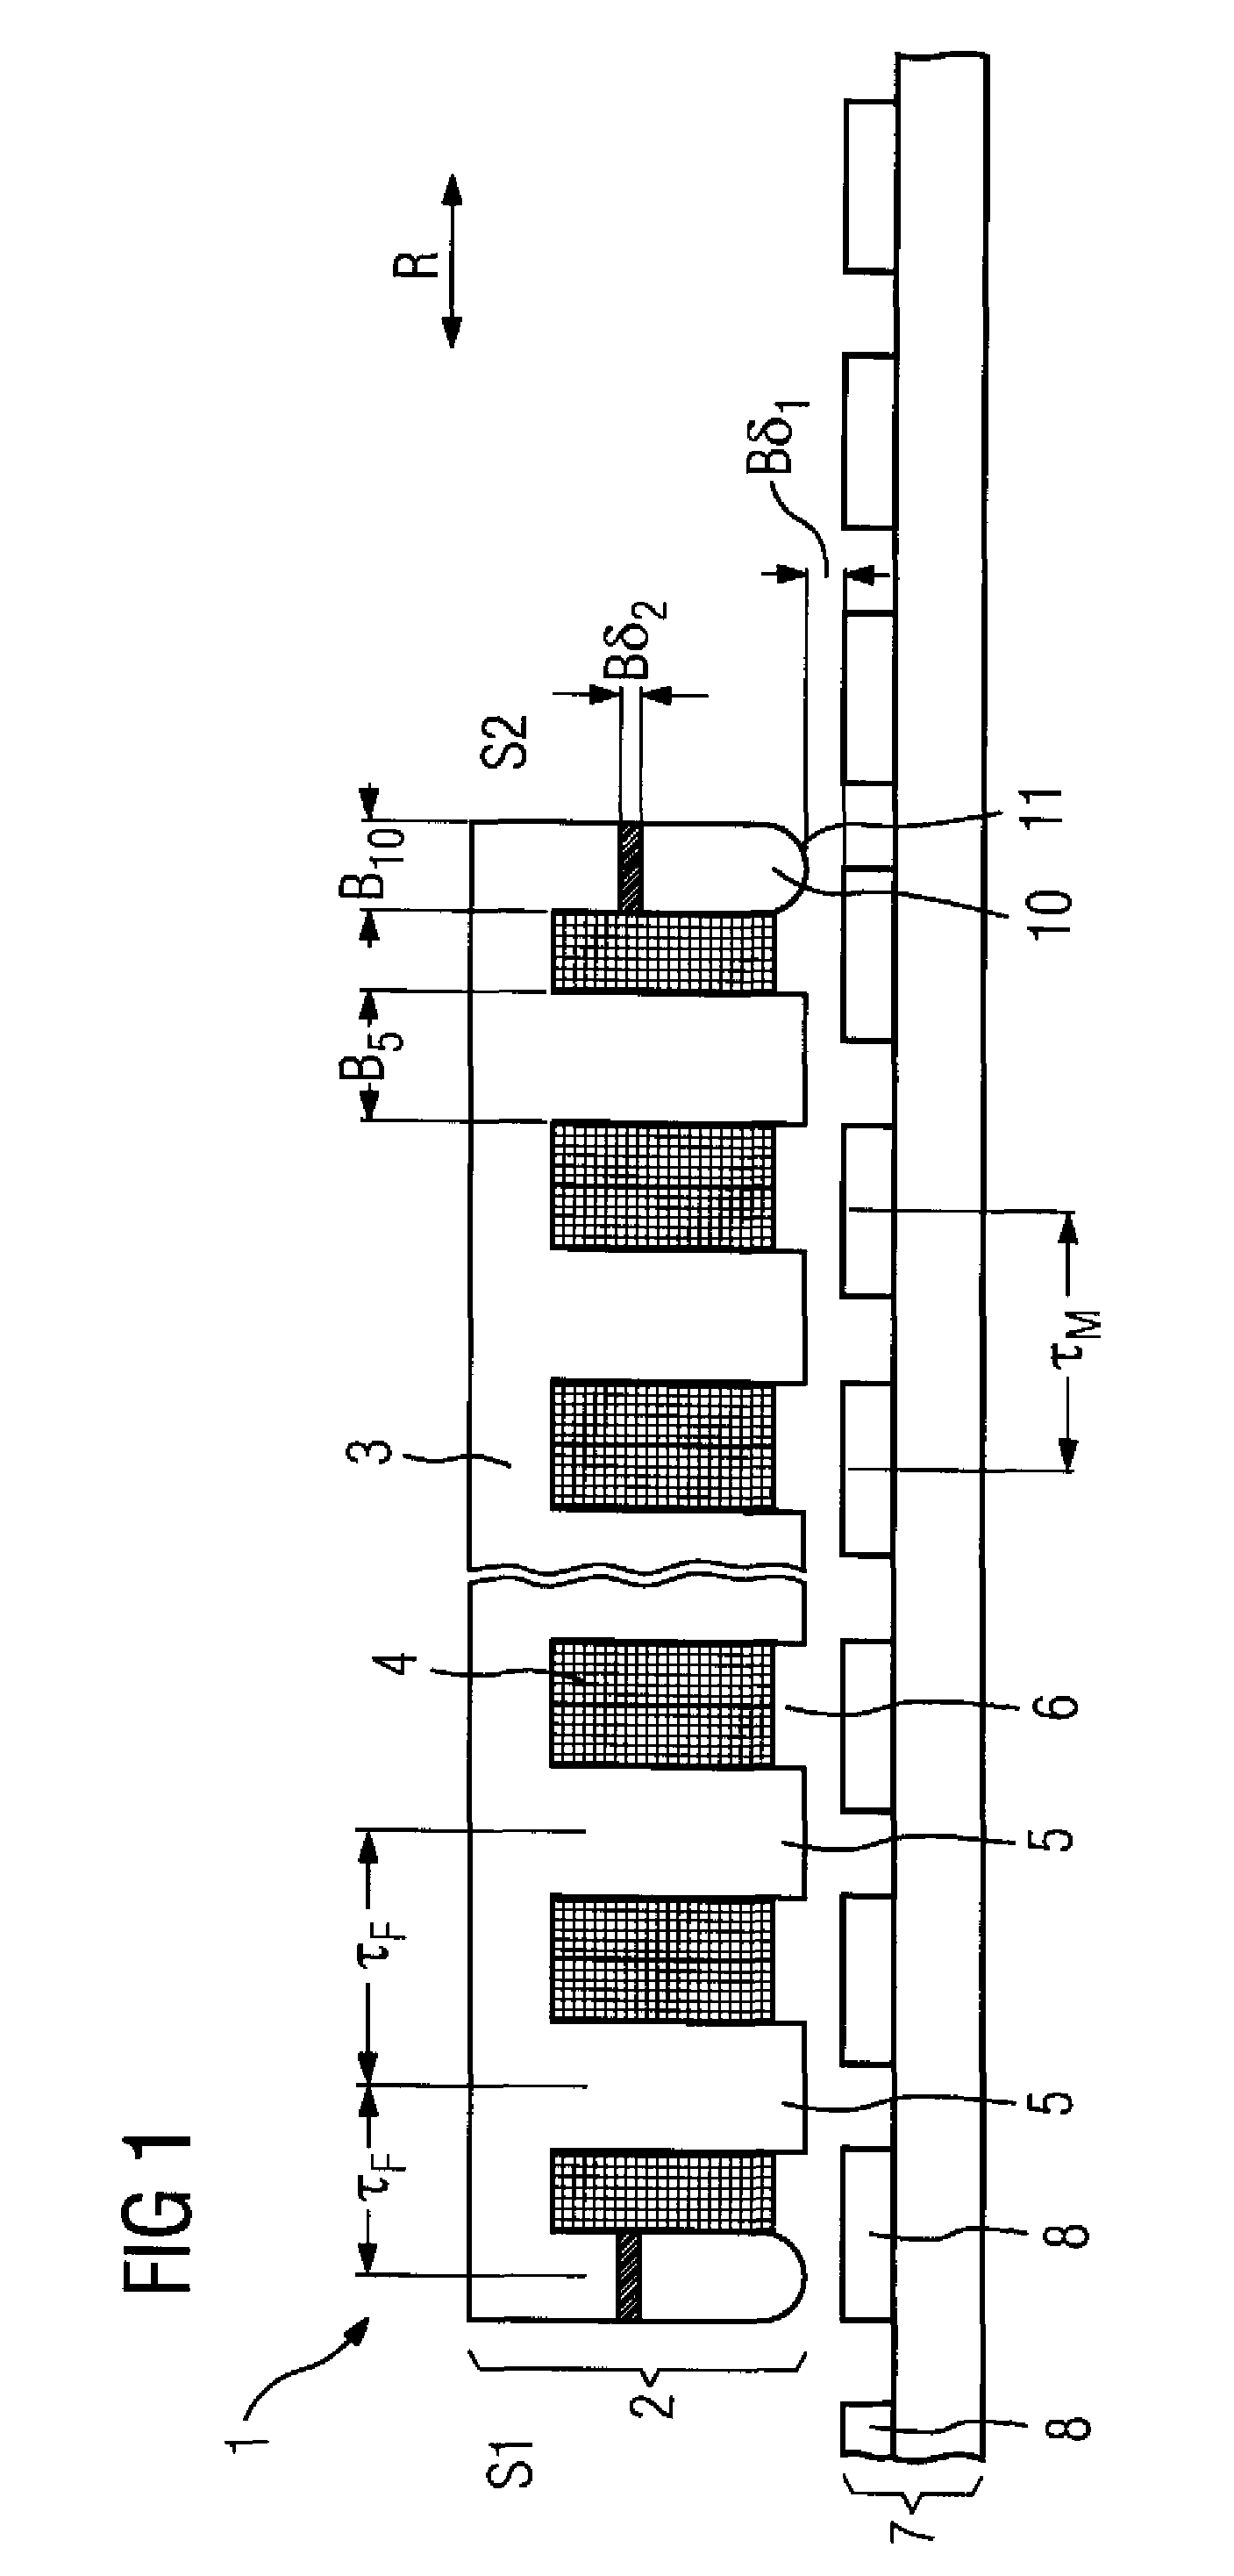 Linear motor with force ripple compensation